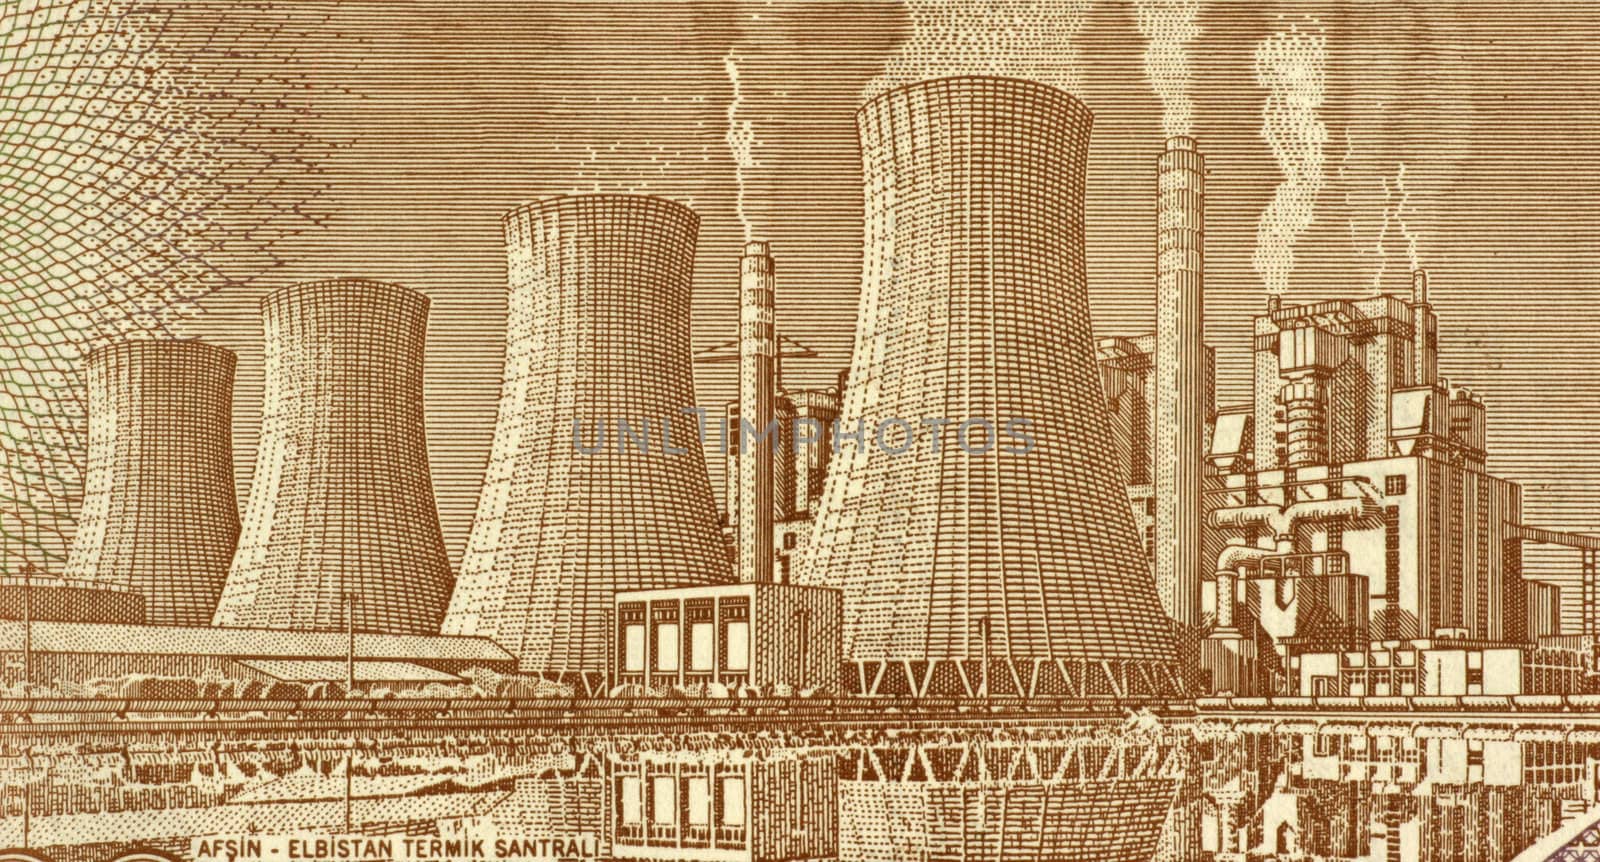 Afsin Elbistan Thermal Power Plant on 5000 Liras 1970 Banknote from Turkey.